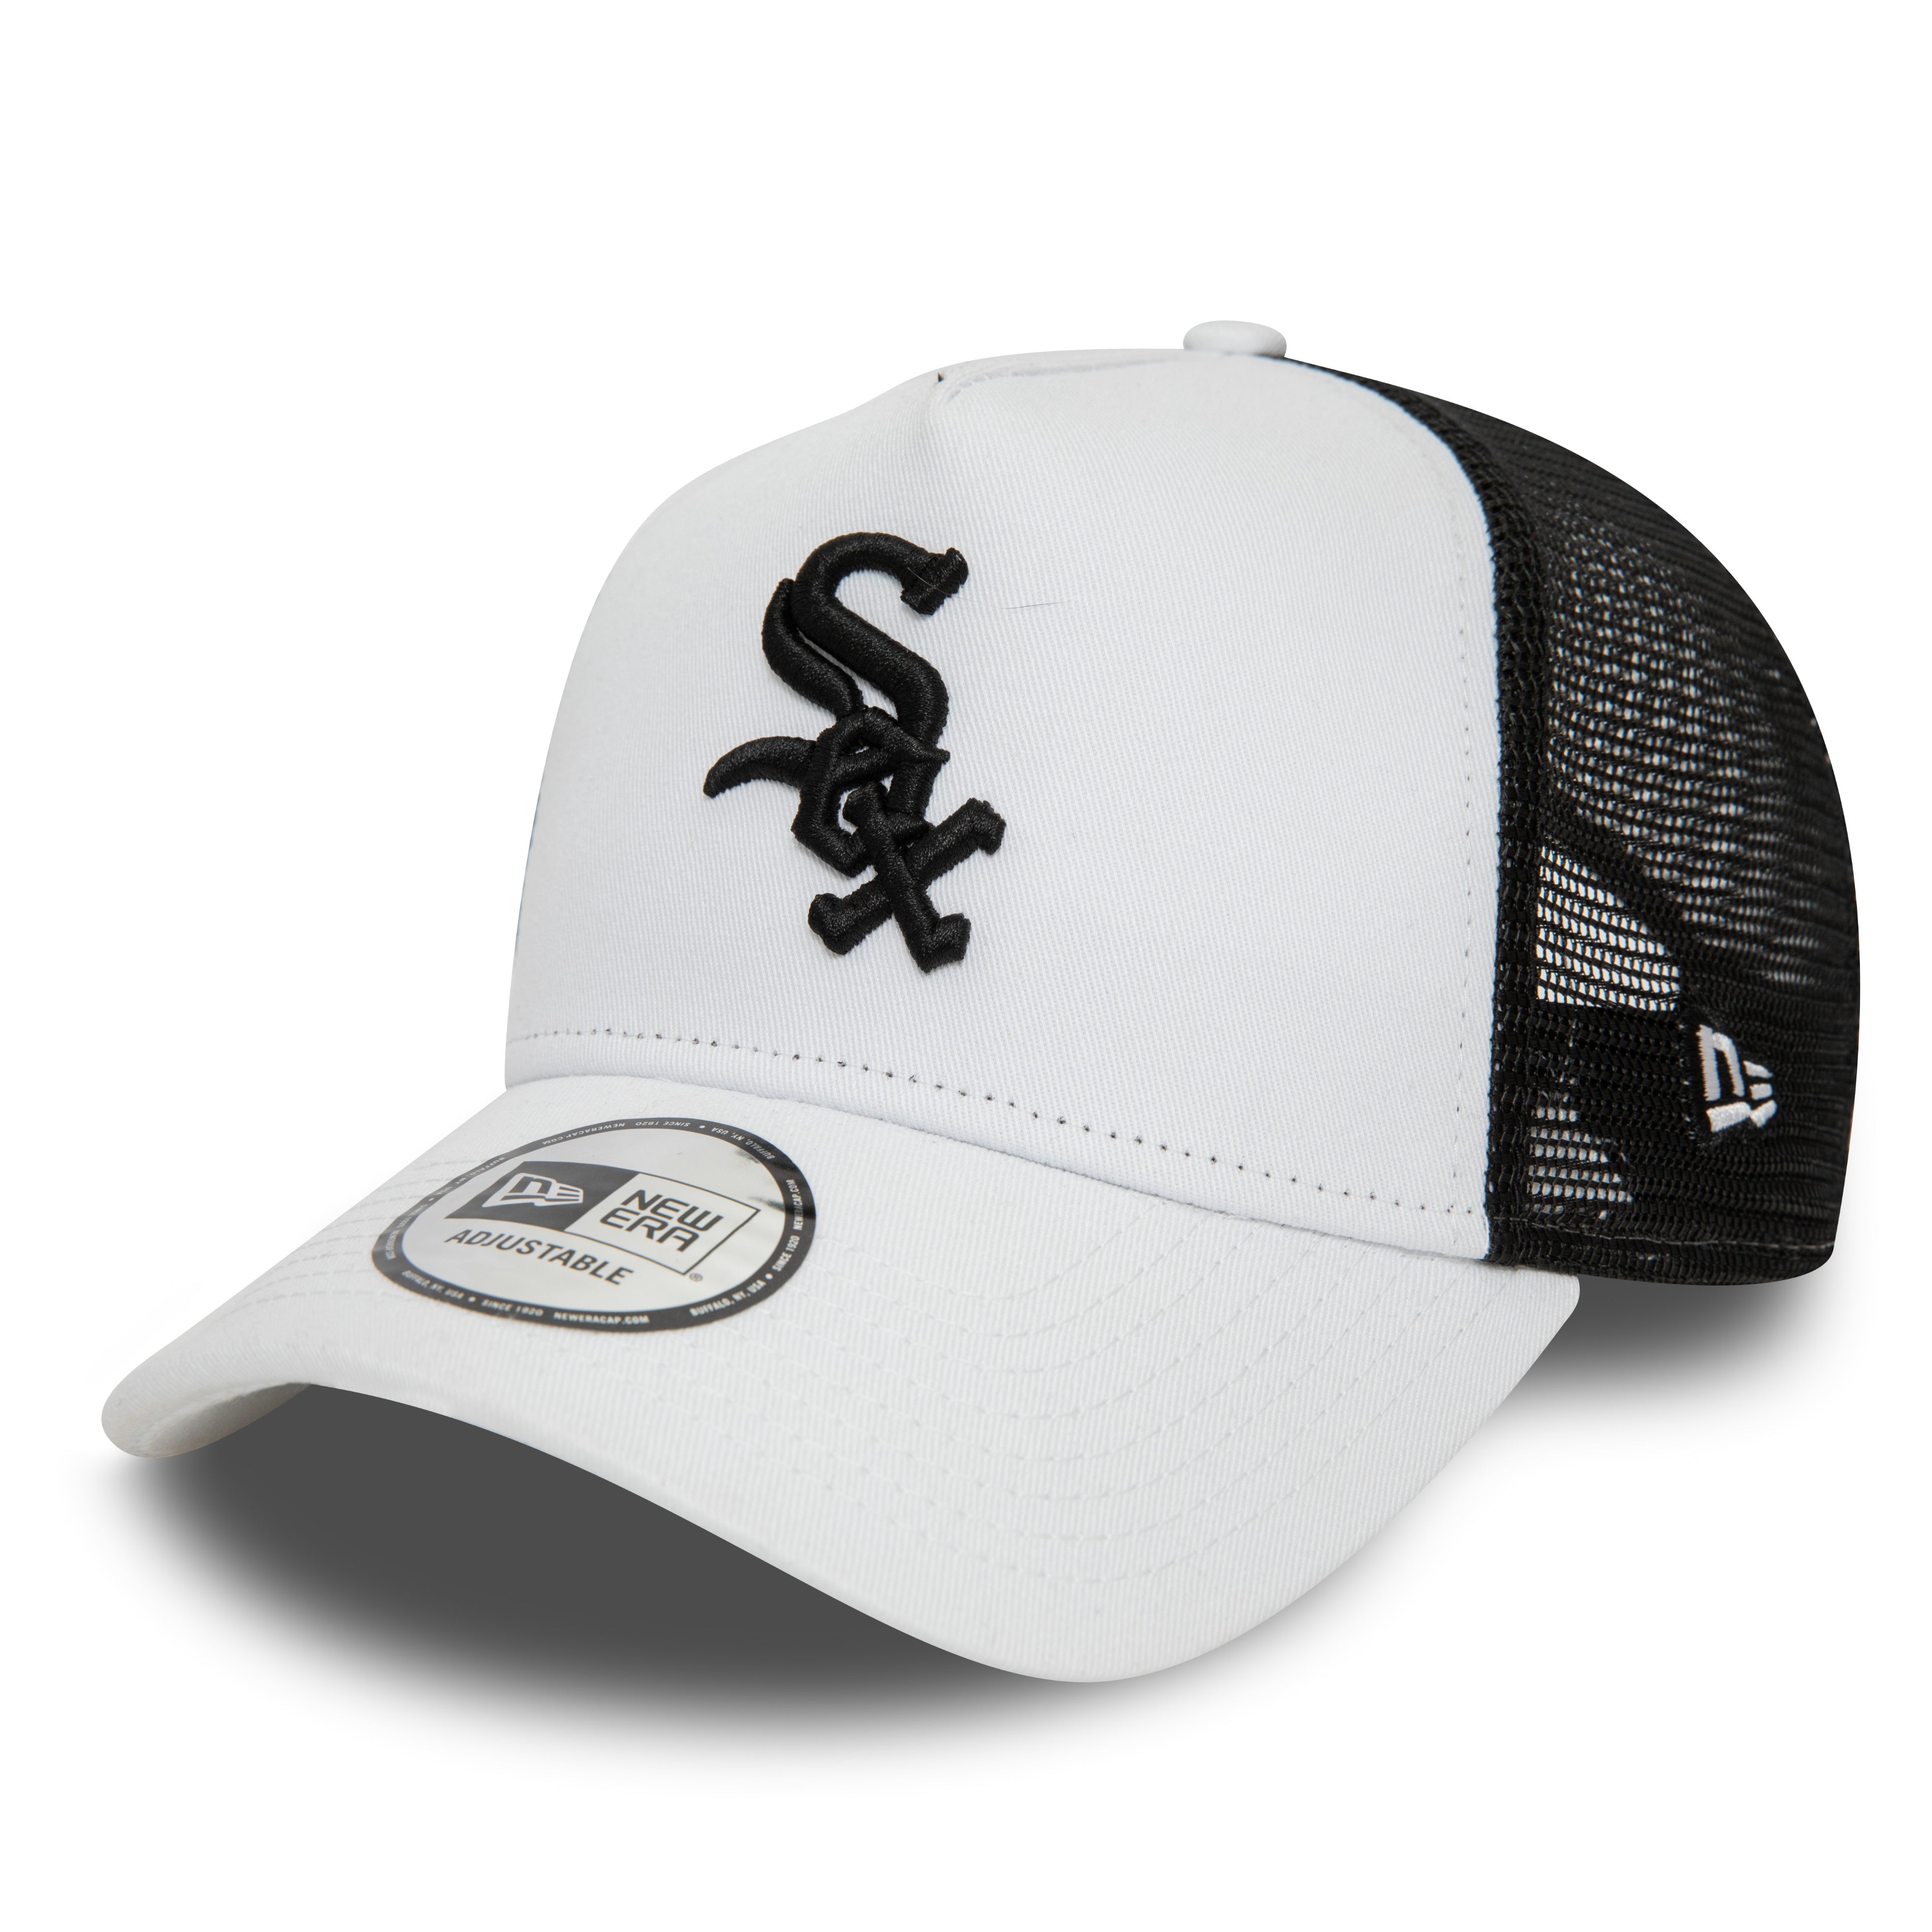 NEW ERA 9FORTY MLB LEAGUE ESSENTIAL CHICAGO WHITE SOX A-FRAME TRUCKER